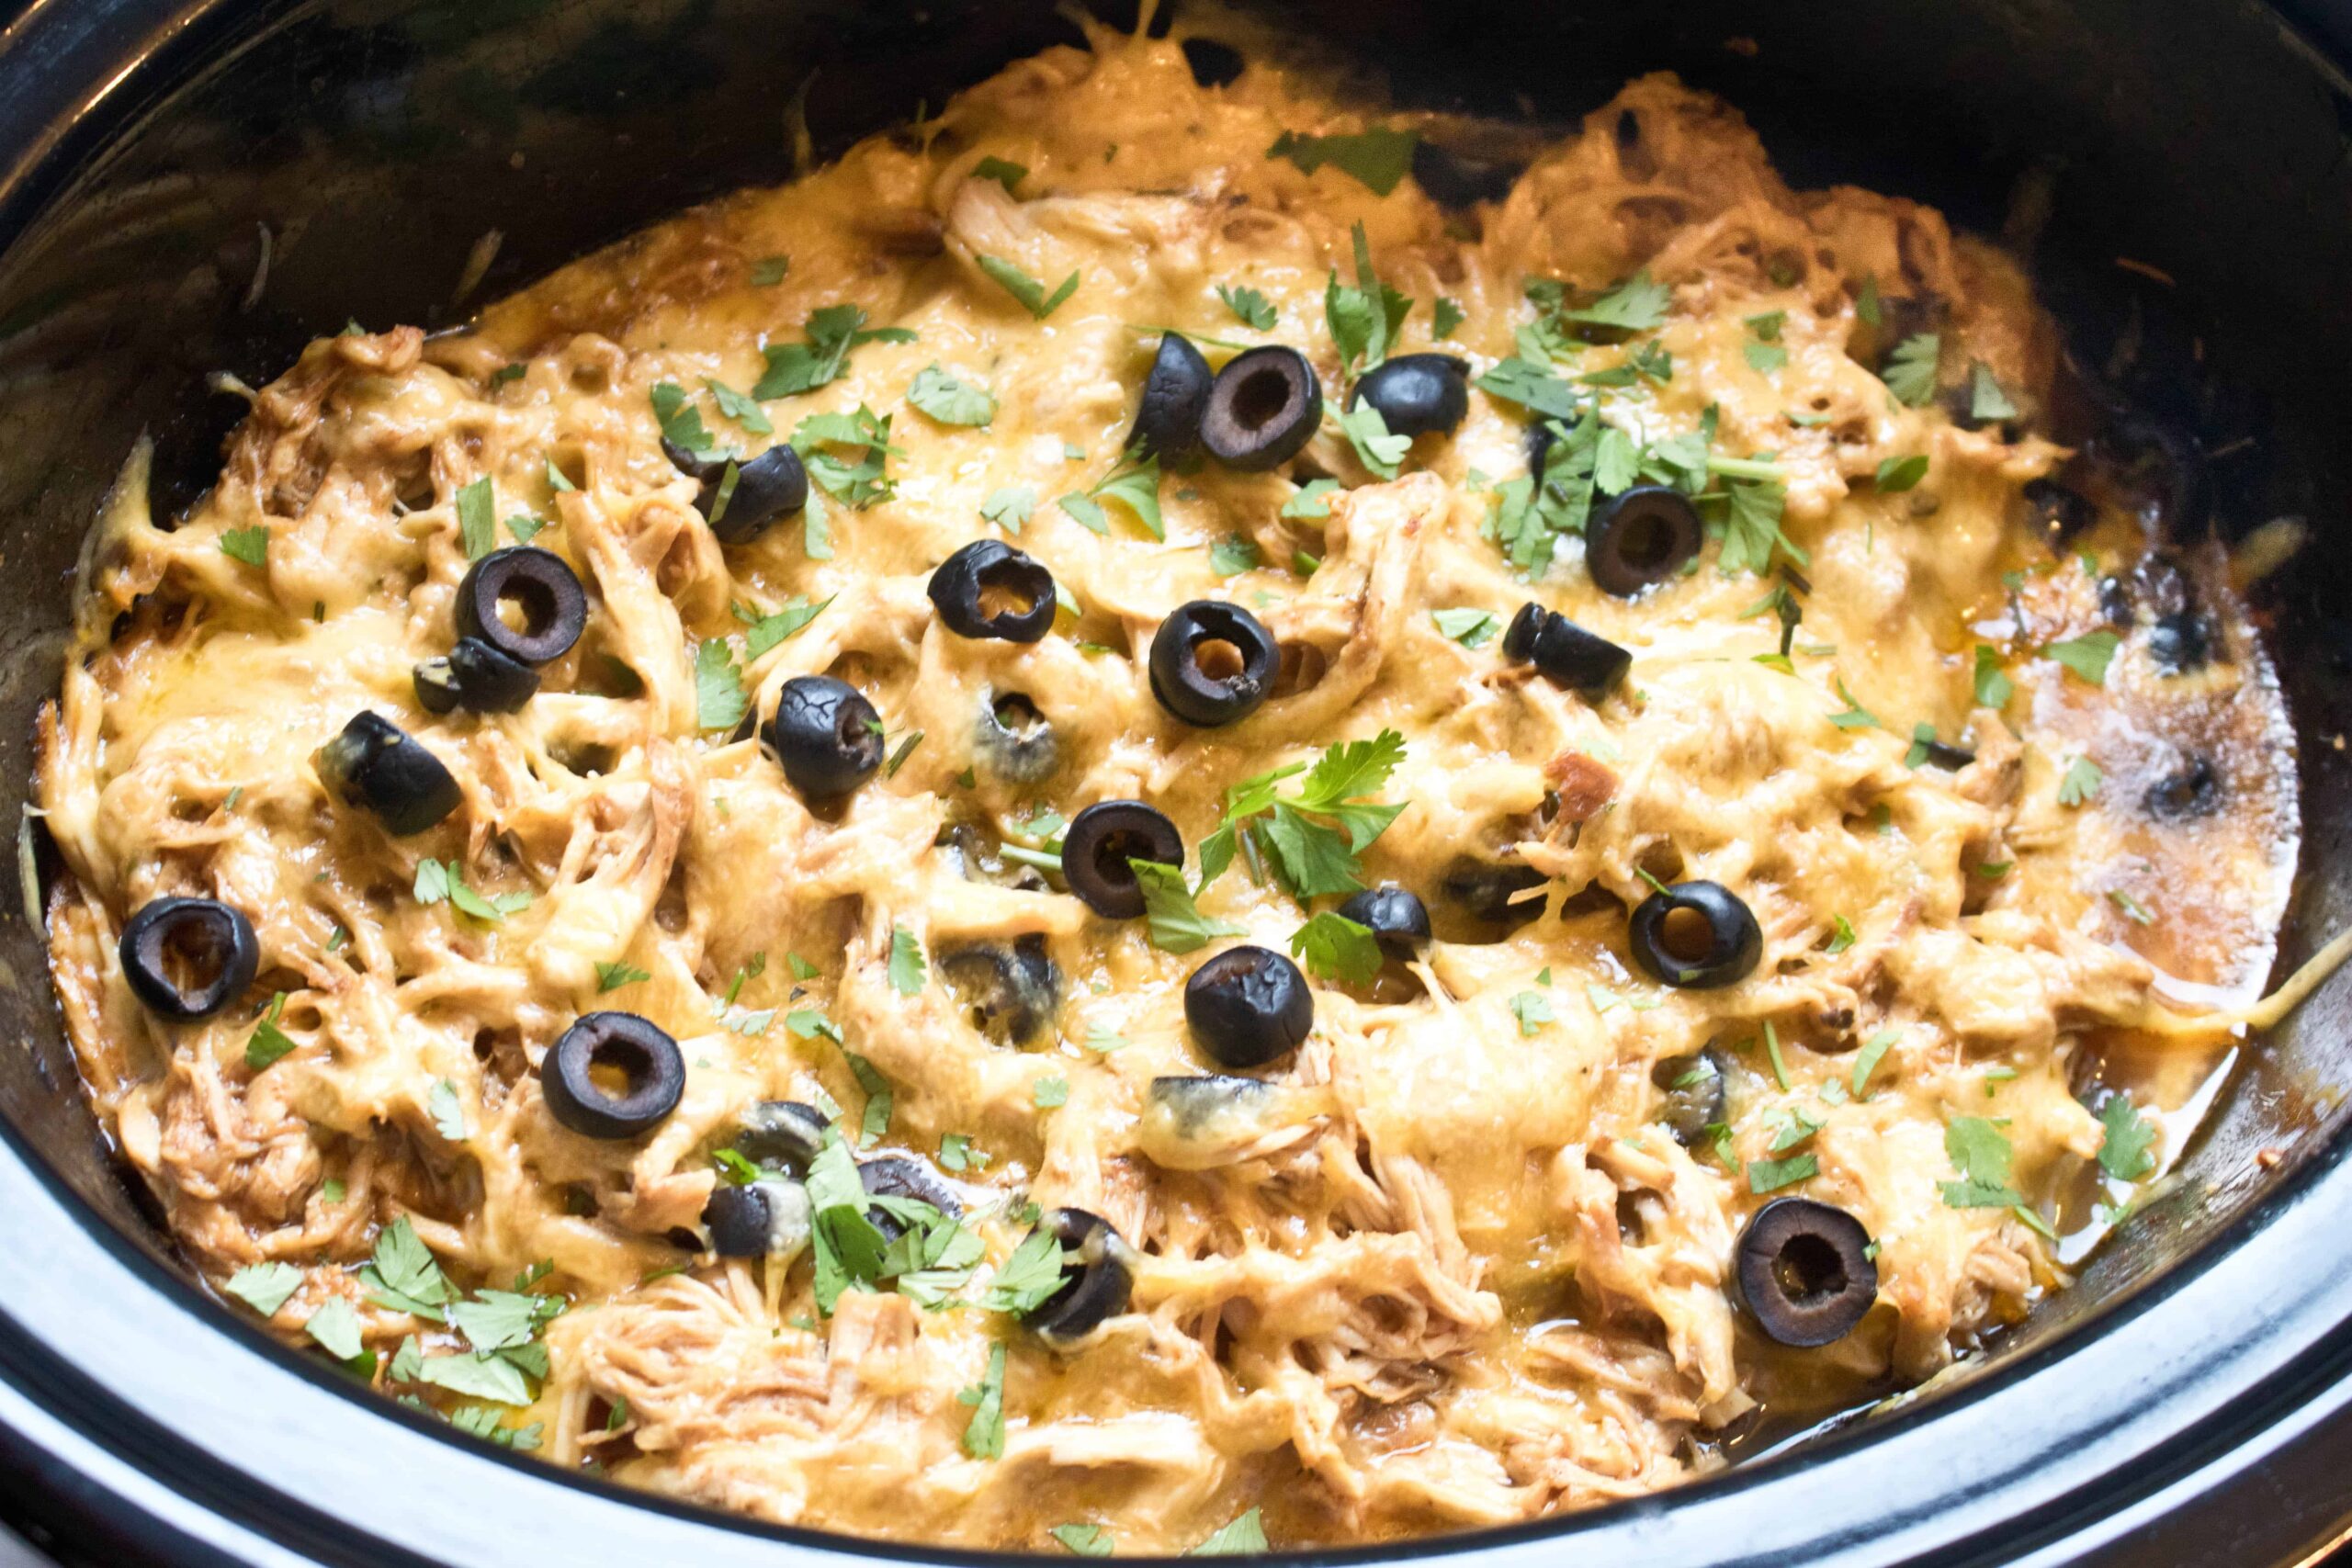 cooked shredded chicken in a crock pot with melted cheese and black olives